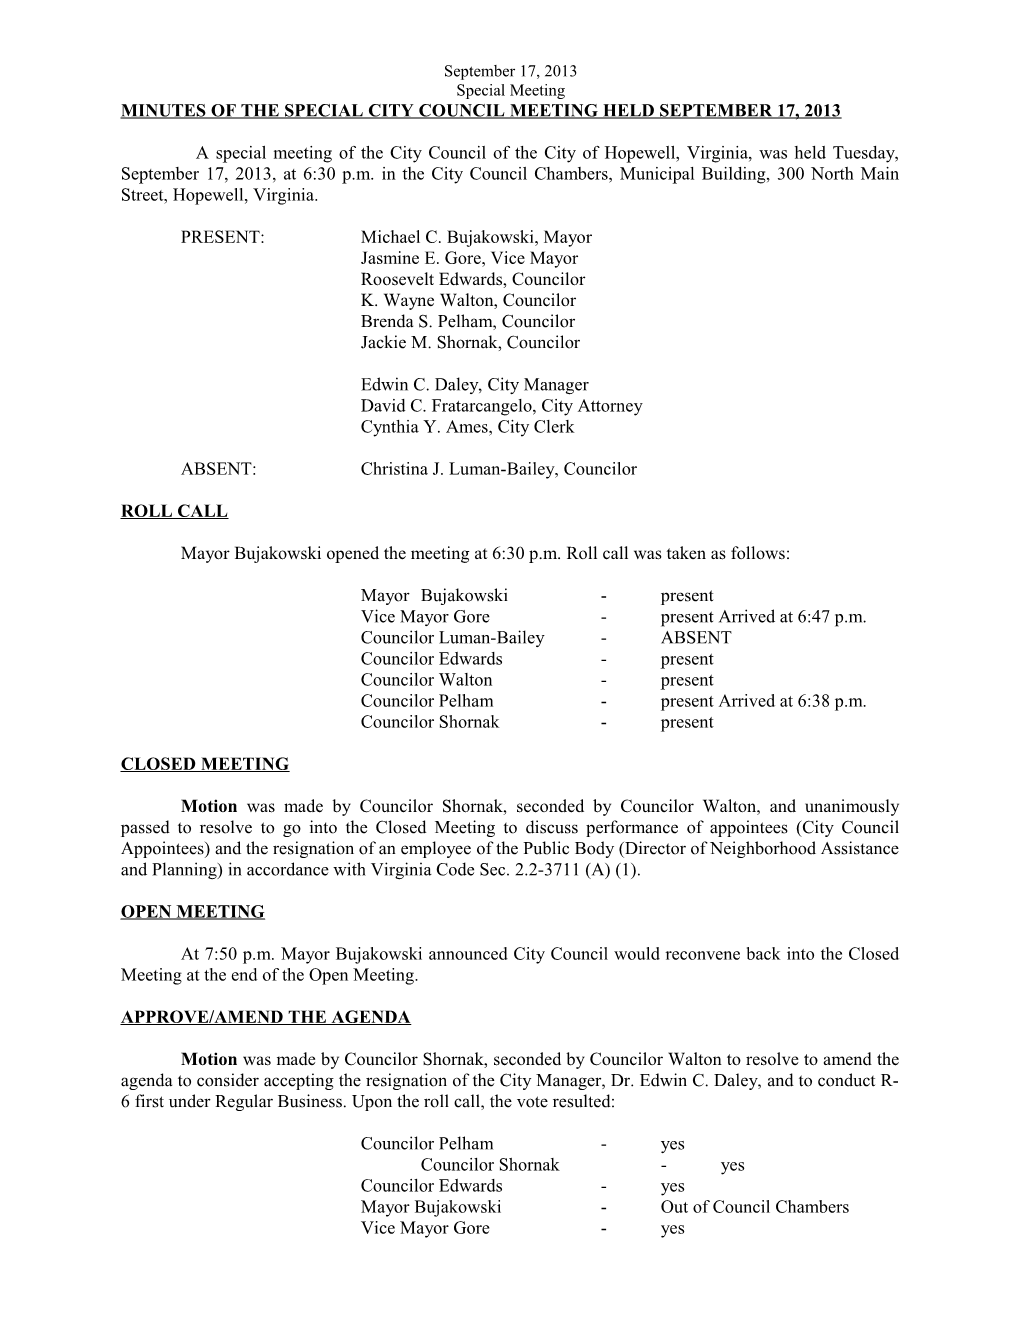 Minutes of the Special City Council Meeting Held September 17, 2013